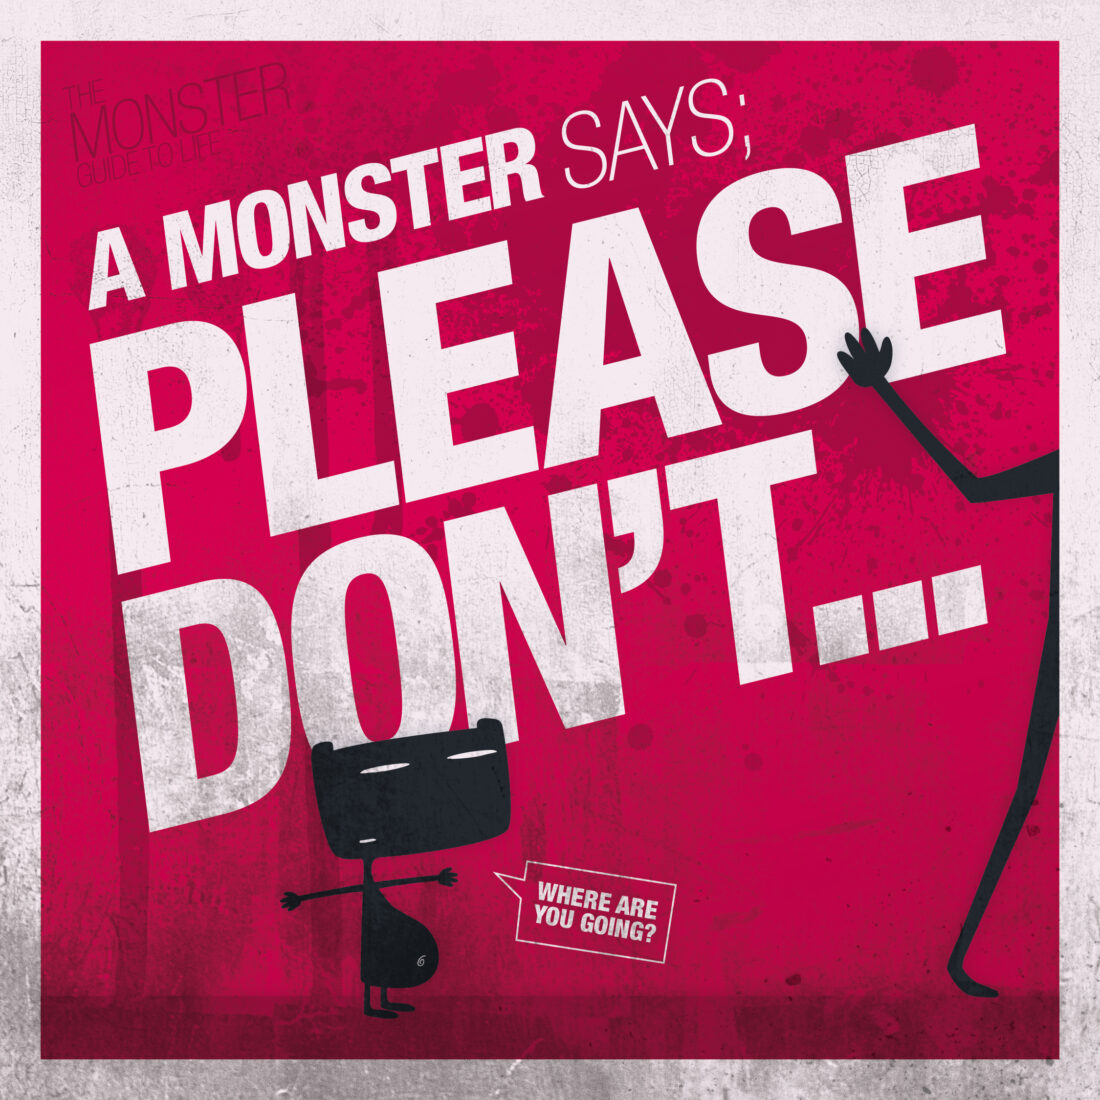 A monster says; please don't...